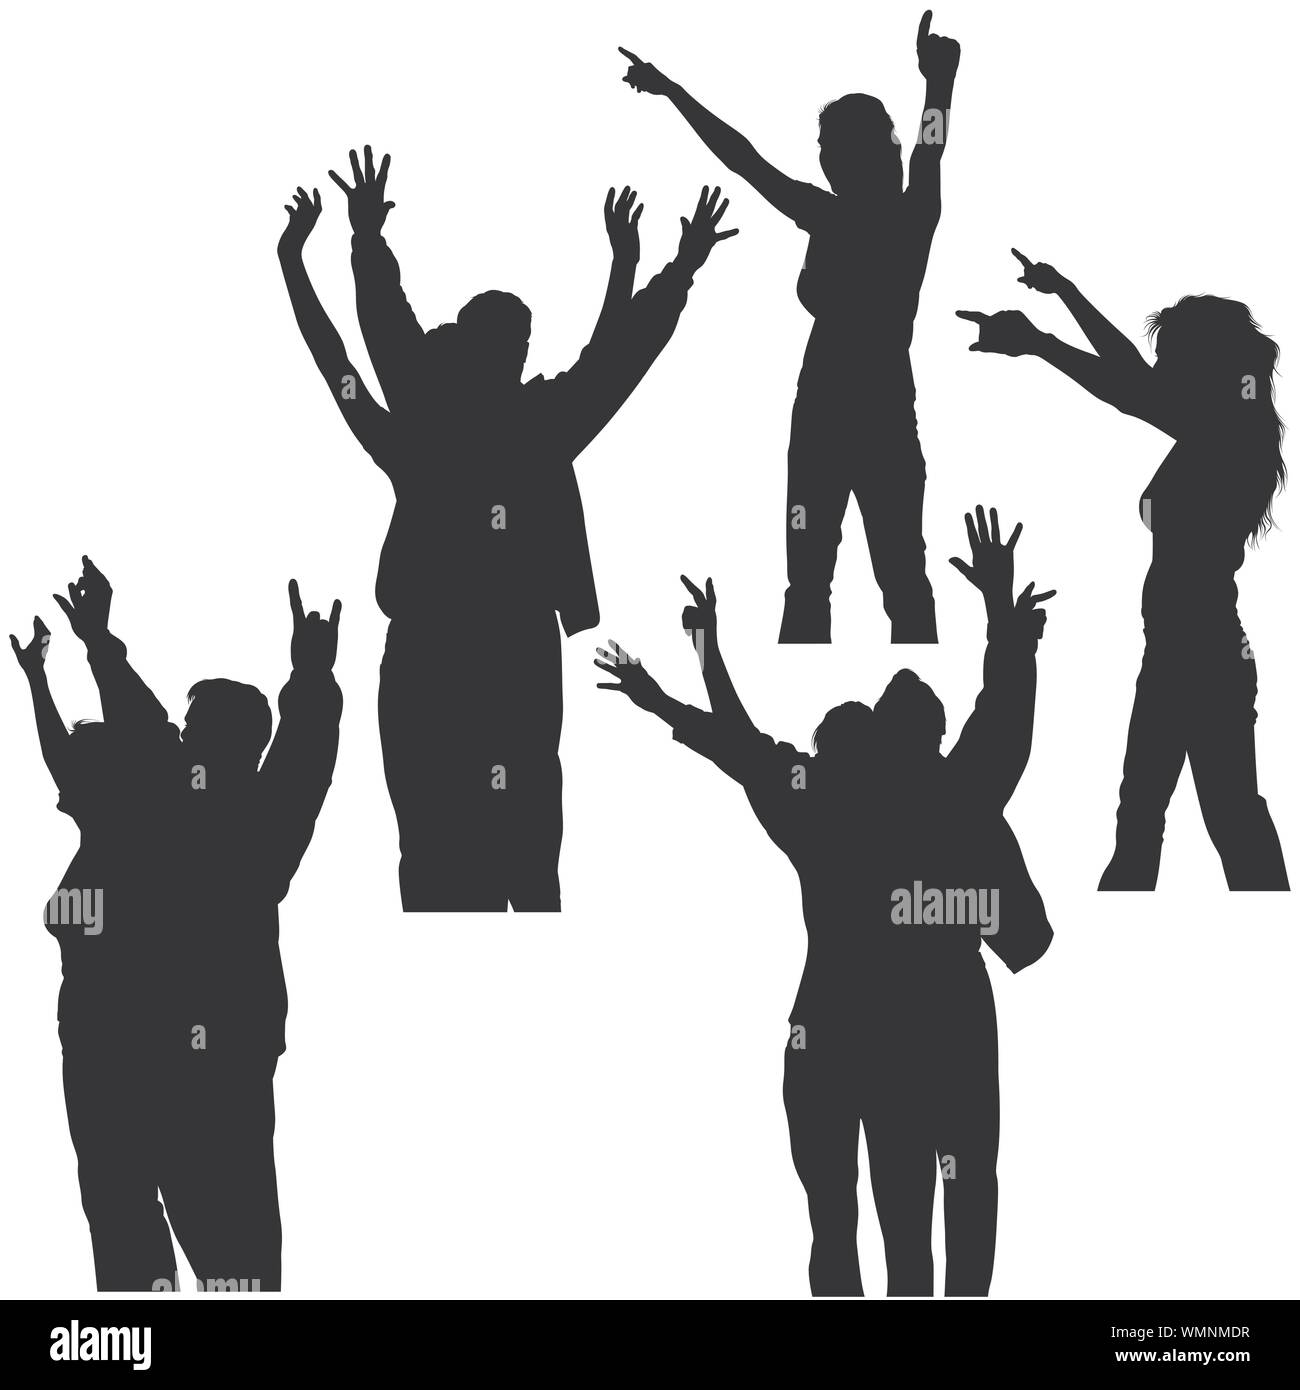 Hands Up Silhouettes Stock Vector